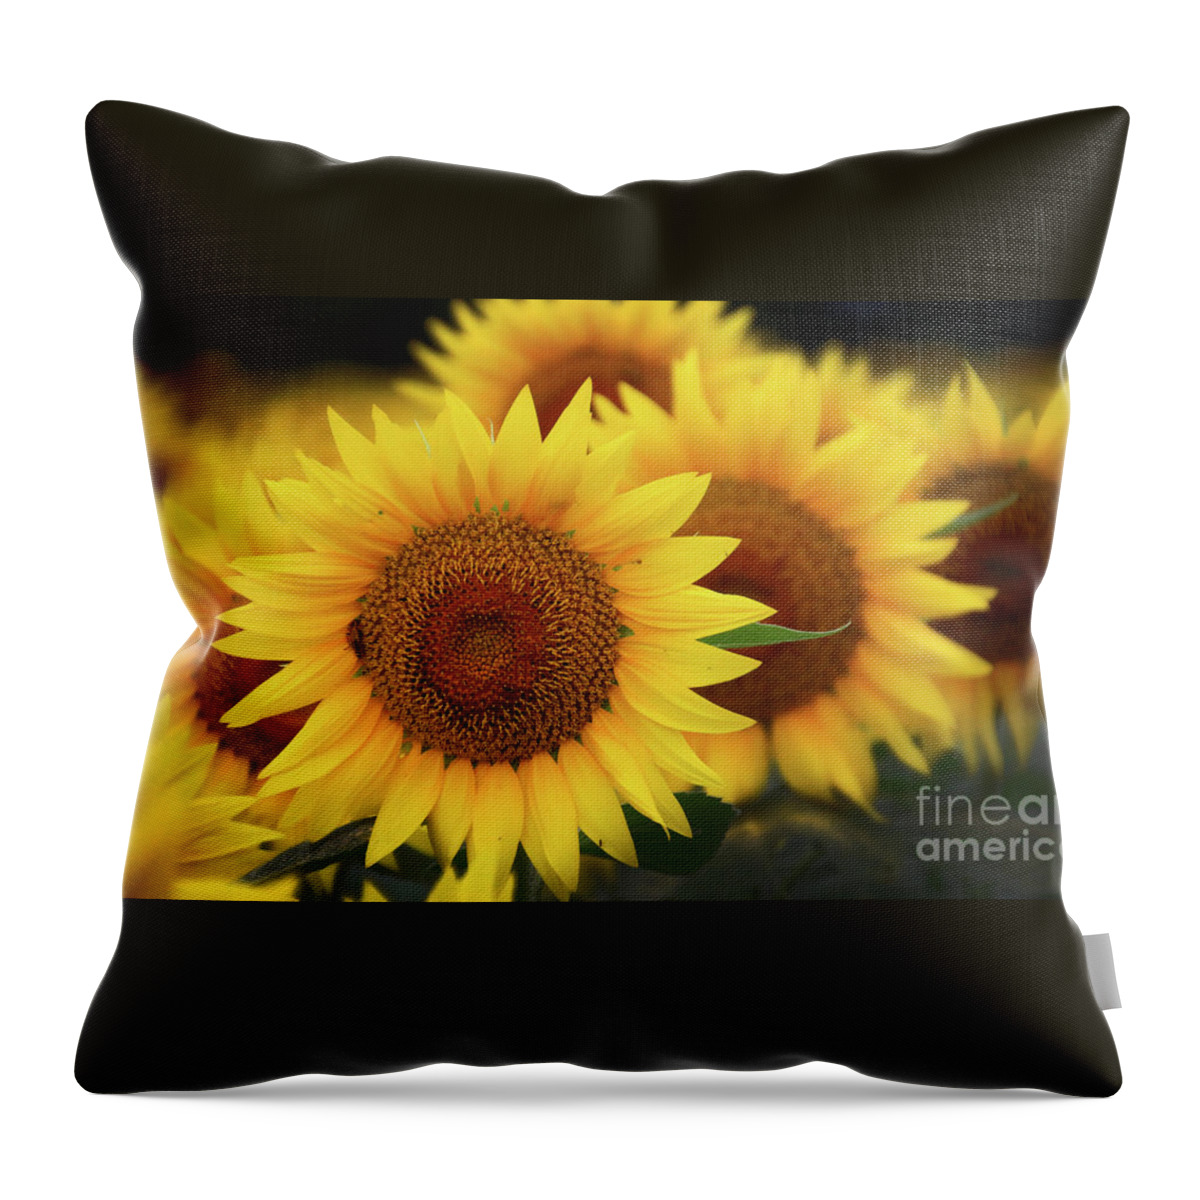 Sunflowers Throw Pillow featuring the photograph Sunflower-6110 by Gary Gingrich Galleries